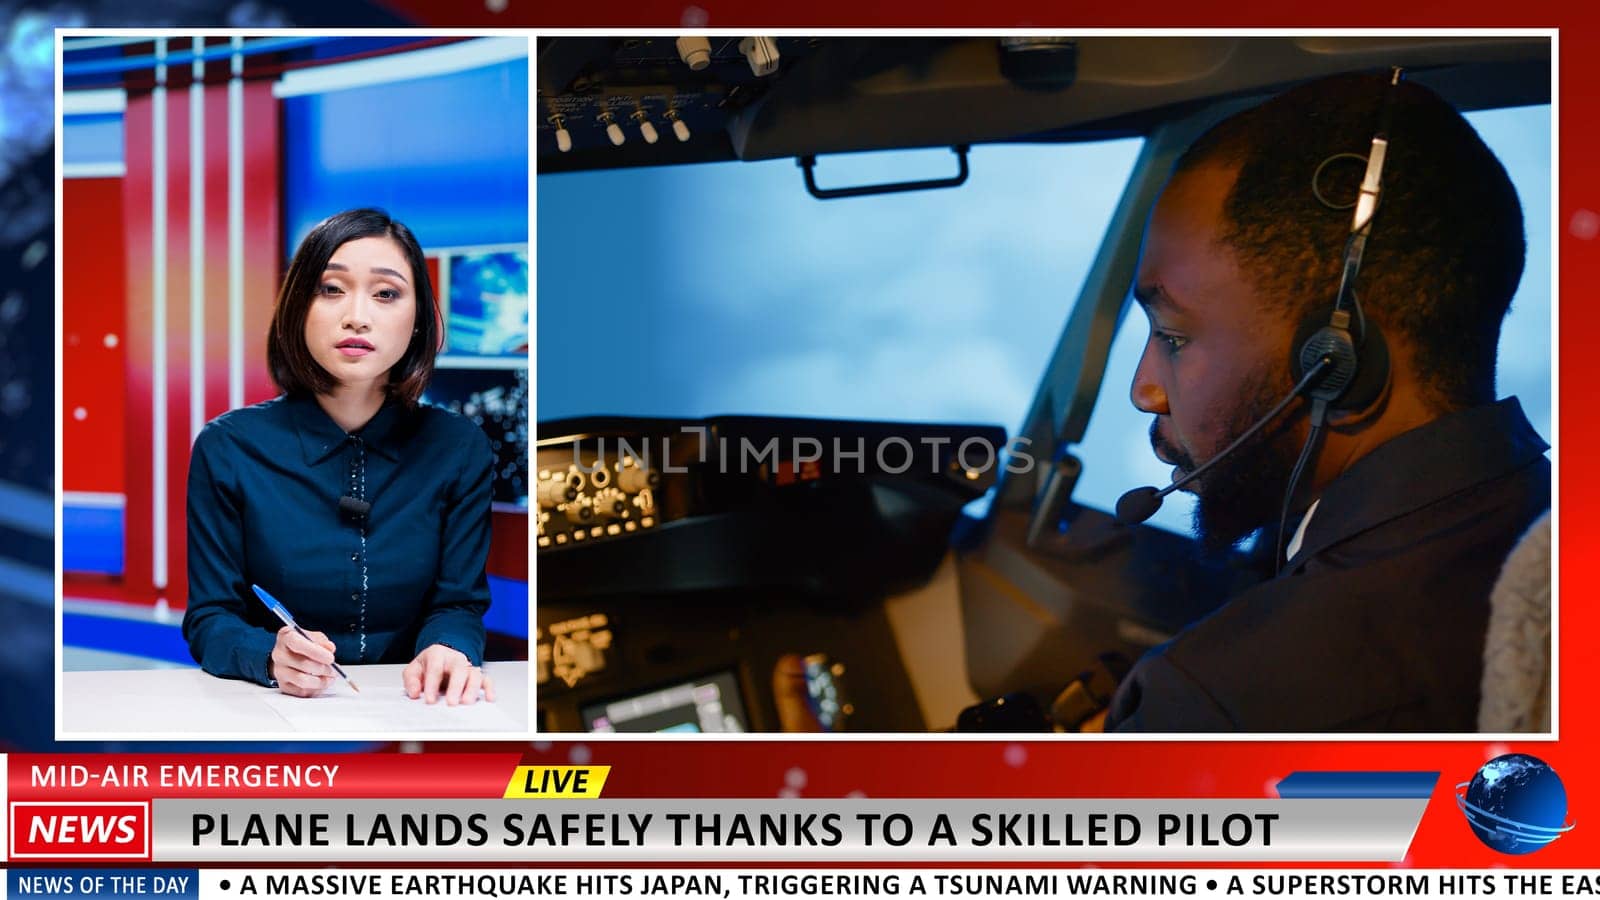 Media presenter talks about pilot hero saving tourists on commercial flight by landing aplane safely. Asian media journalist working on daily headlines transmission, tv advertisement.